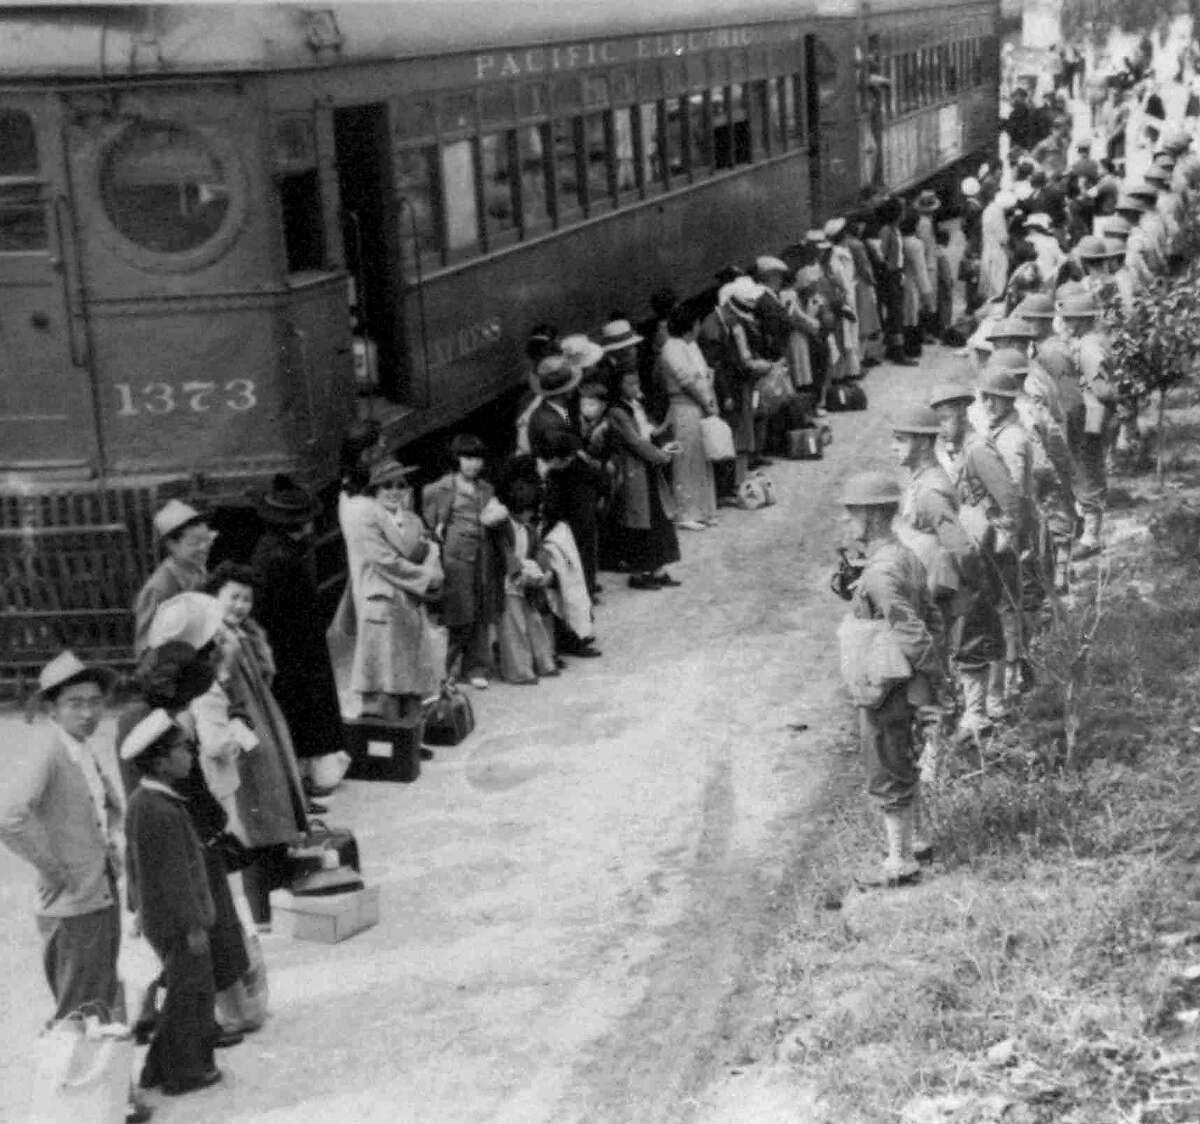 ADVANCE FOR SUNDAY, SEPT. 30--People of Japanese descent line up for a train that will take them from the Santa Anita assembly camp in California to an internment camp at Gila River, Ariz. in 1942. U.S. soldiers face them, right. The internment of Japanese during World War II required the suspension of civil rights for the minority group. (AP Photo/National Archives)